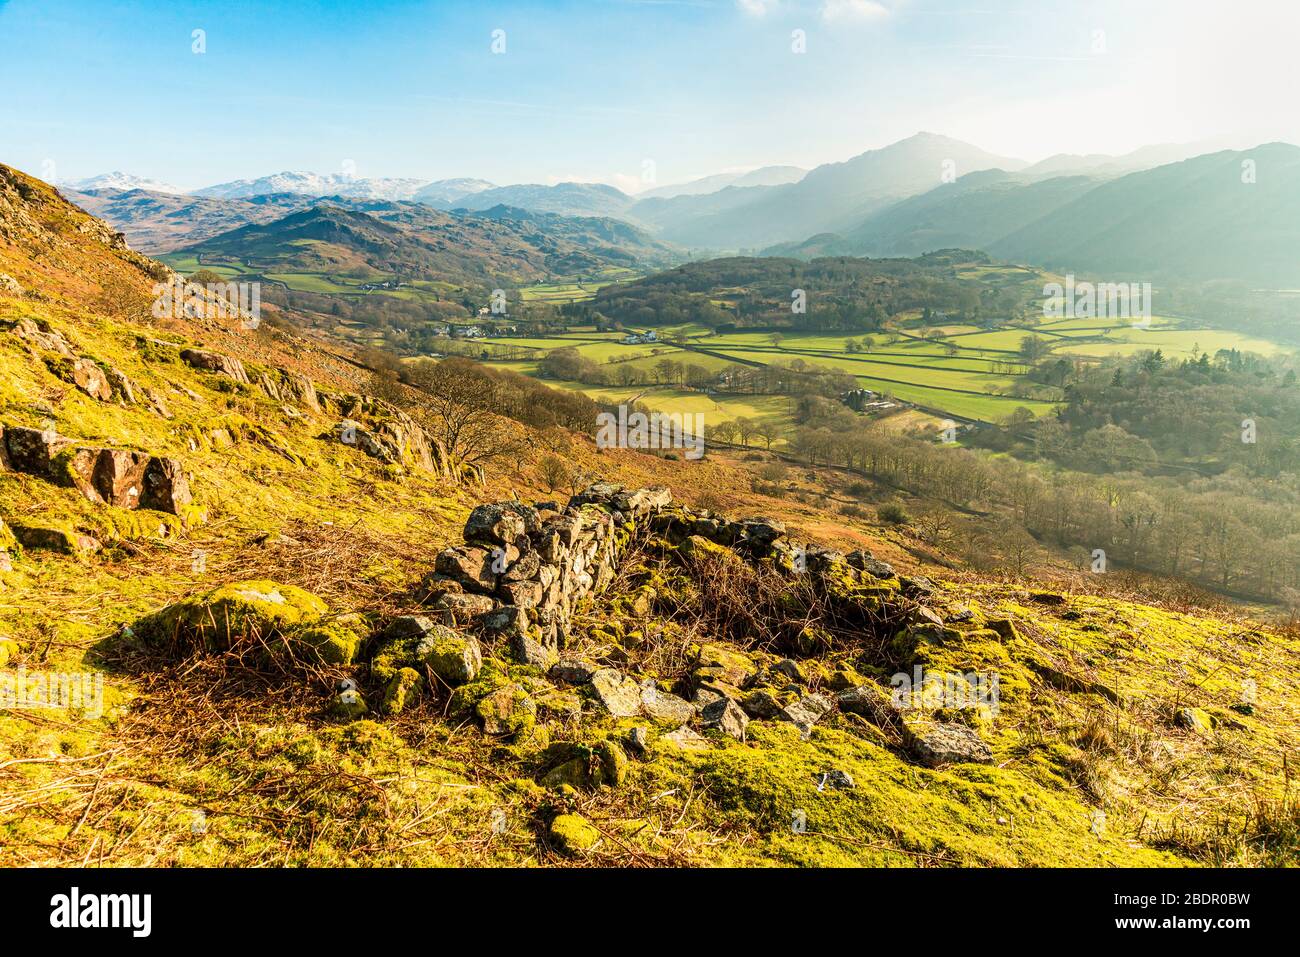 View over Eskdale in the English Lake District from Hollinghead Bank. Skyline fells include Bowfell, Crinkle Crags and Harter Fell. Stock Photo